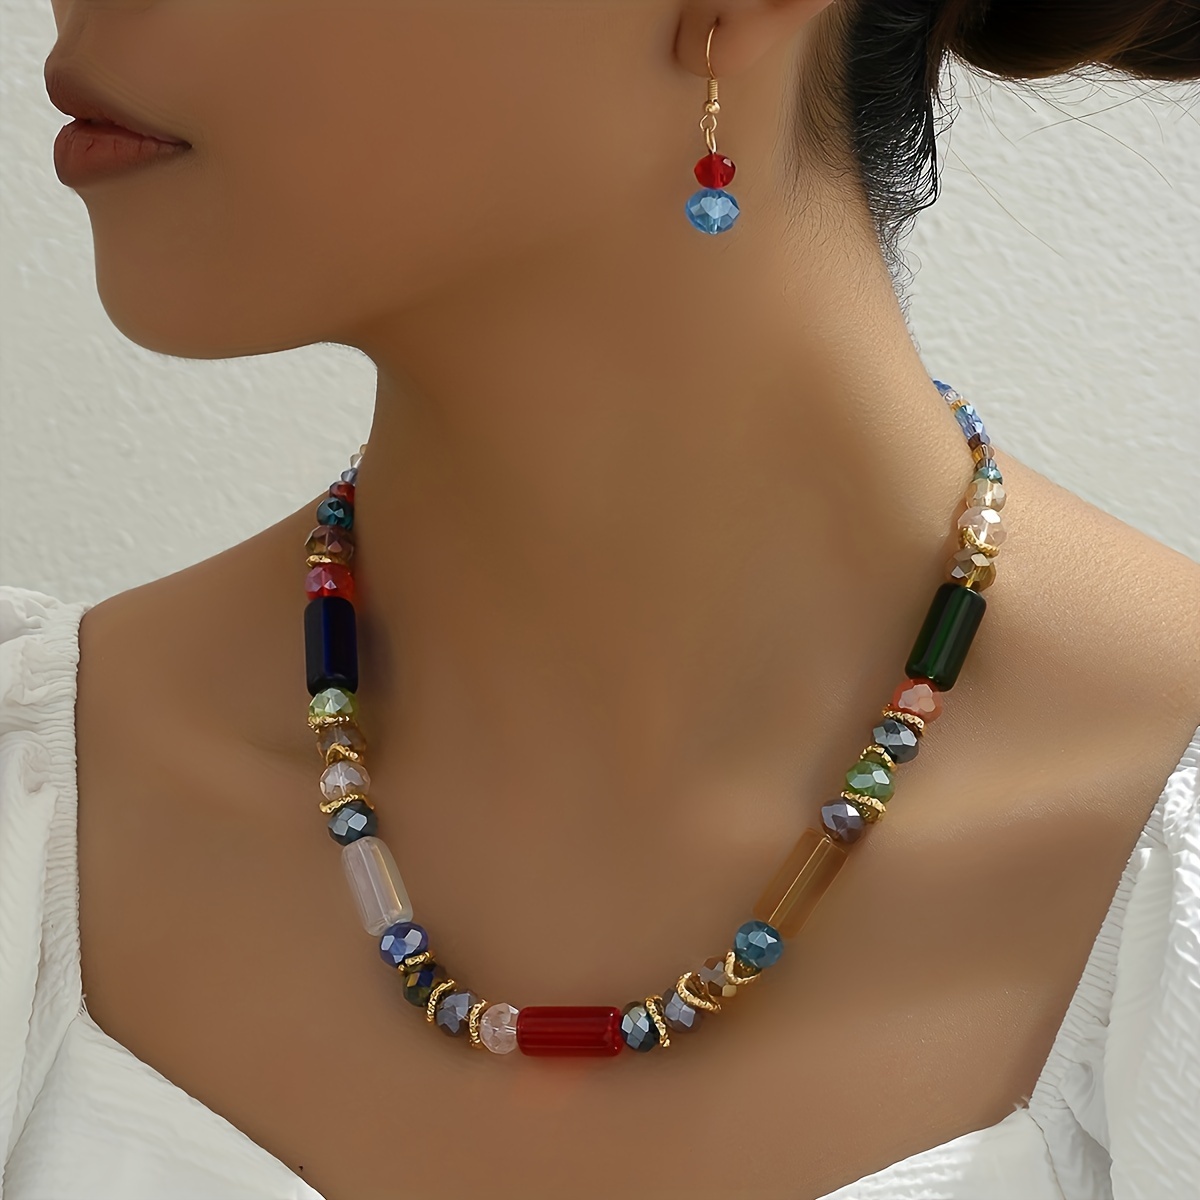 

Bohemian Style Crystal Beaded Necklace And Earring Set For Women, Fashionable And Colorful, Perfect Gift For Girlfriend, Multicolored Boho Jewelry Set